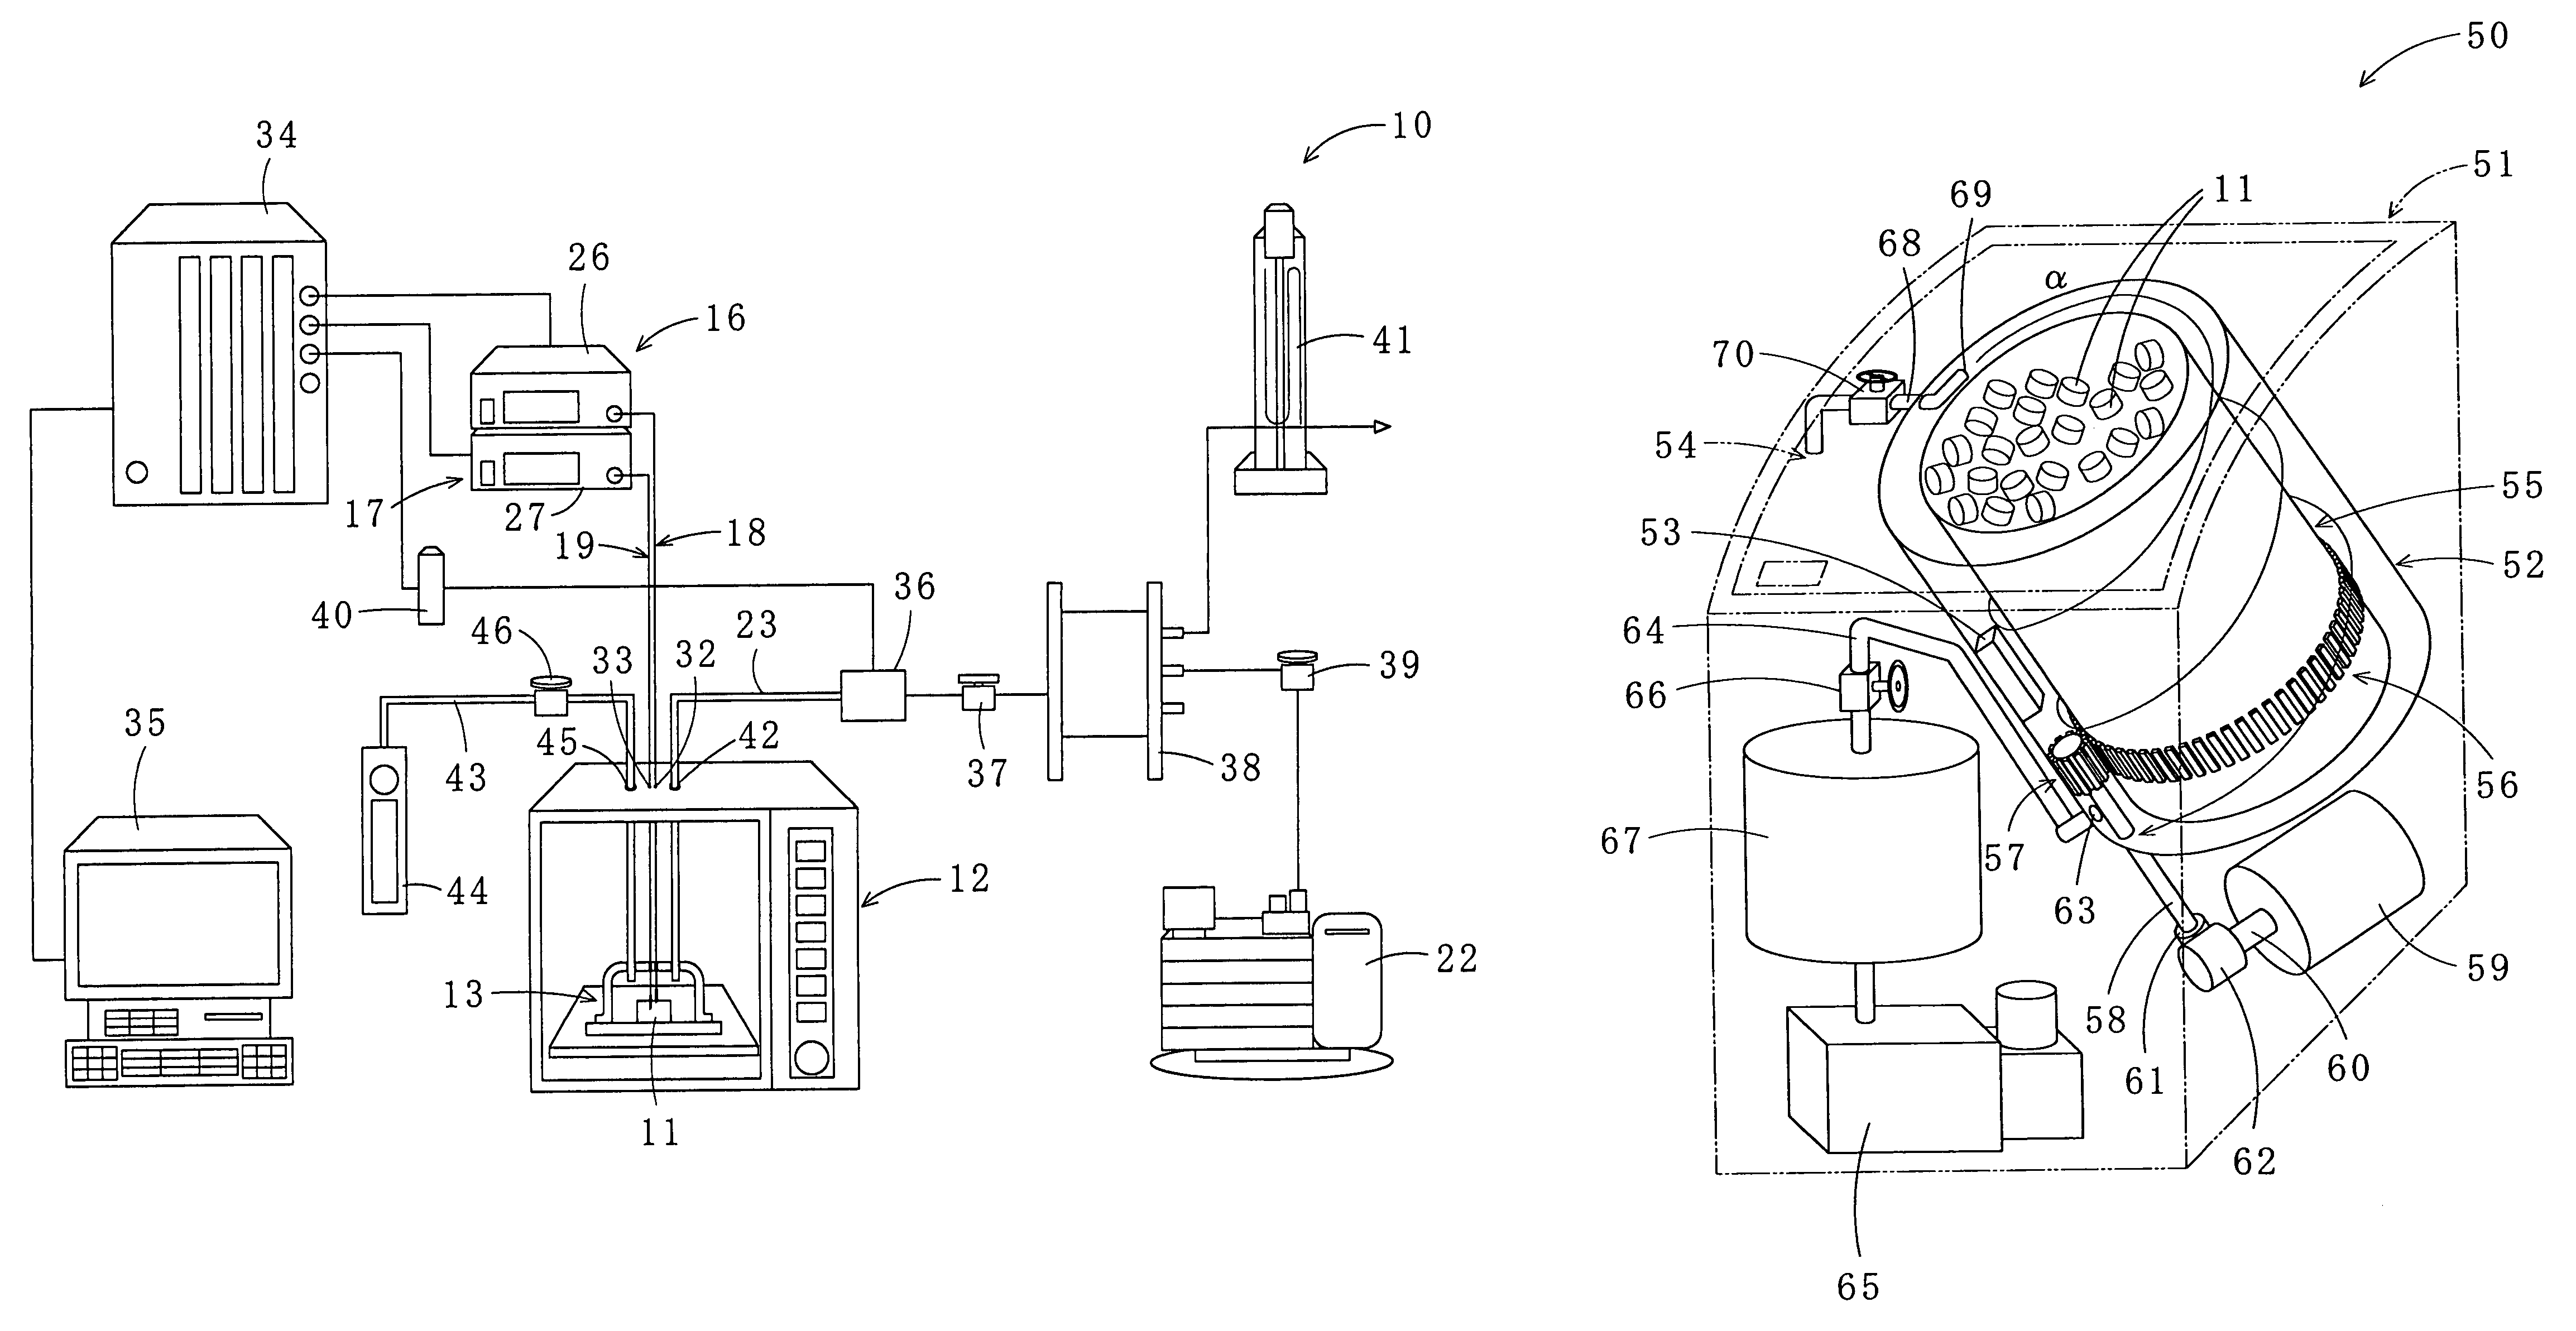 Method for drying under reduced pressure using microwaves